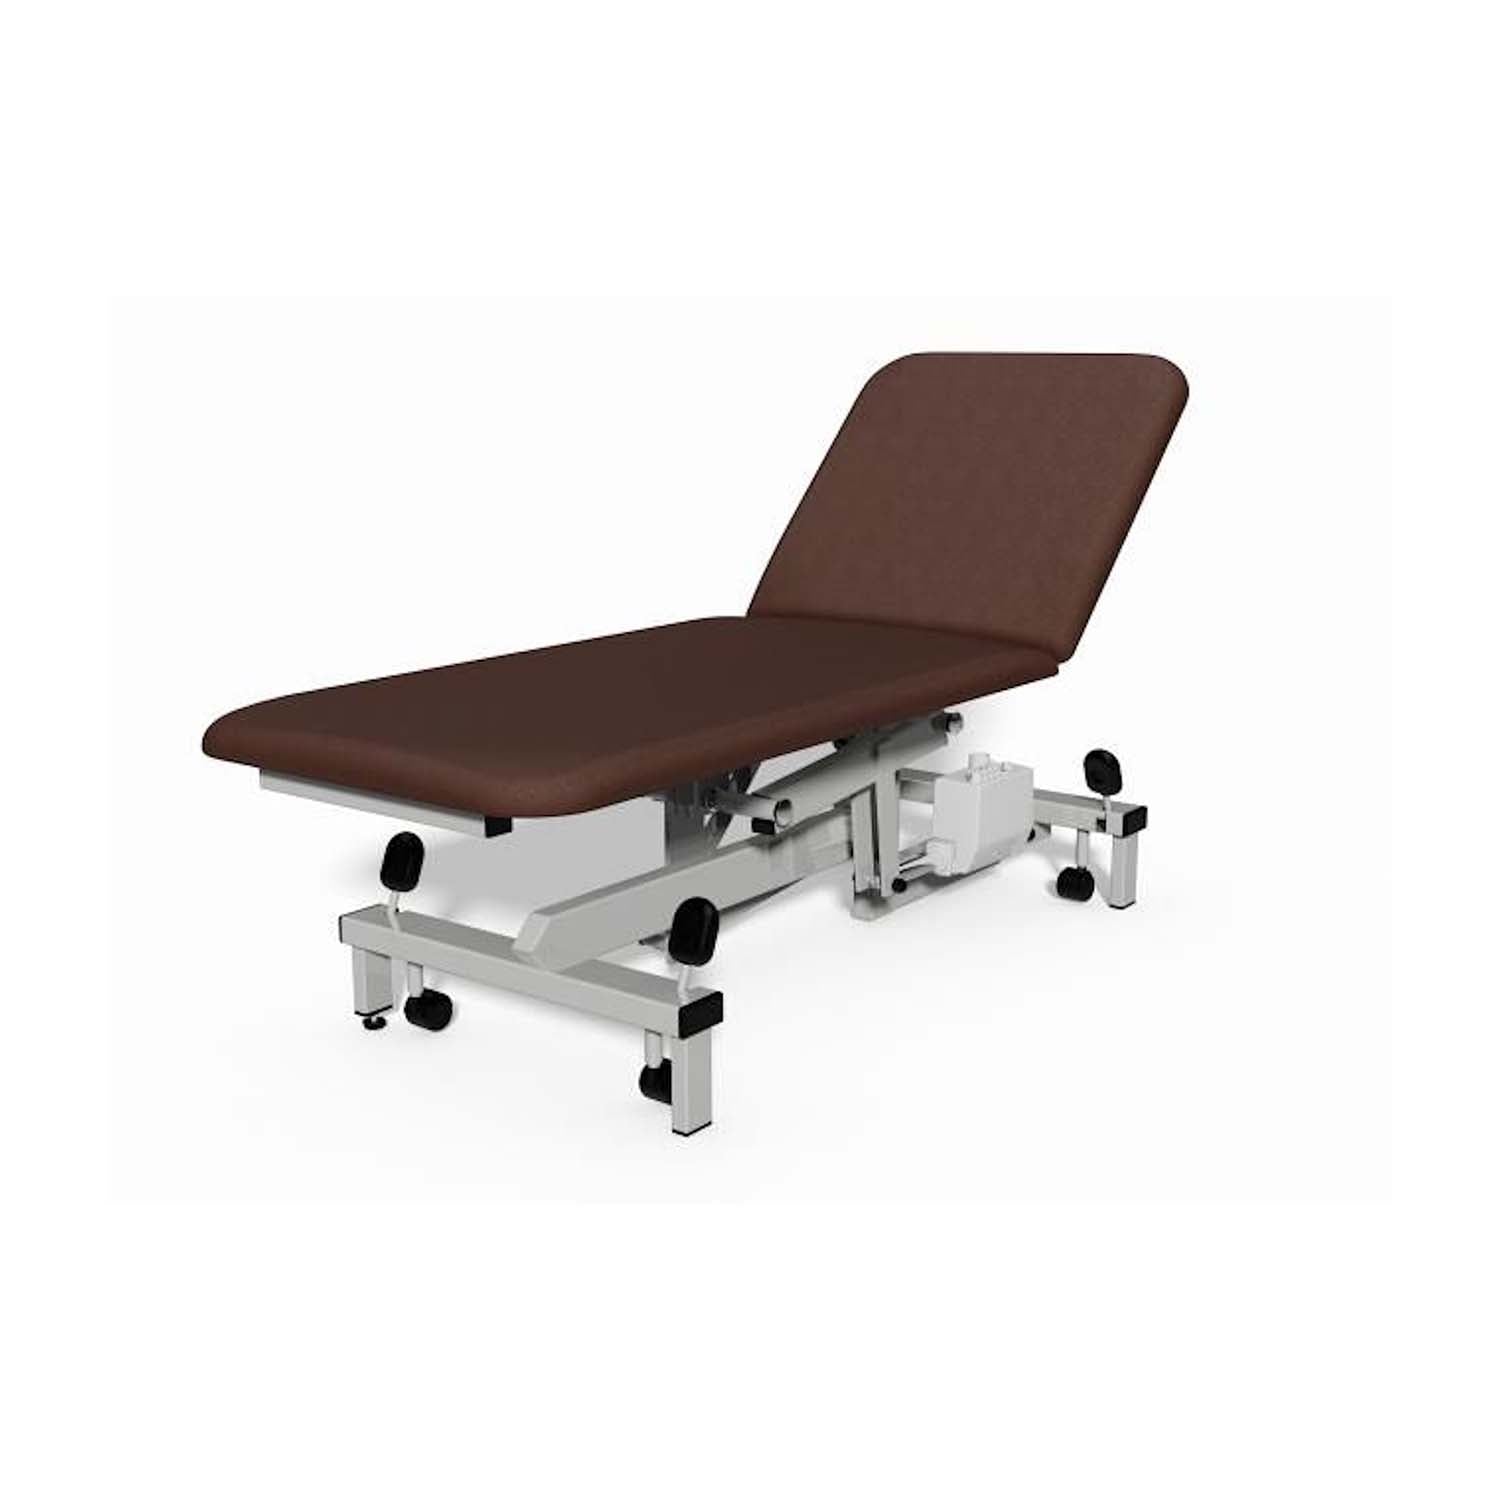 Plinth 2000 Model 502 Examination Couch | Electric | Cocoa